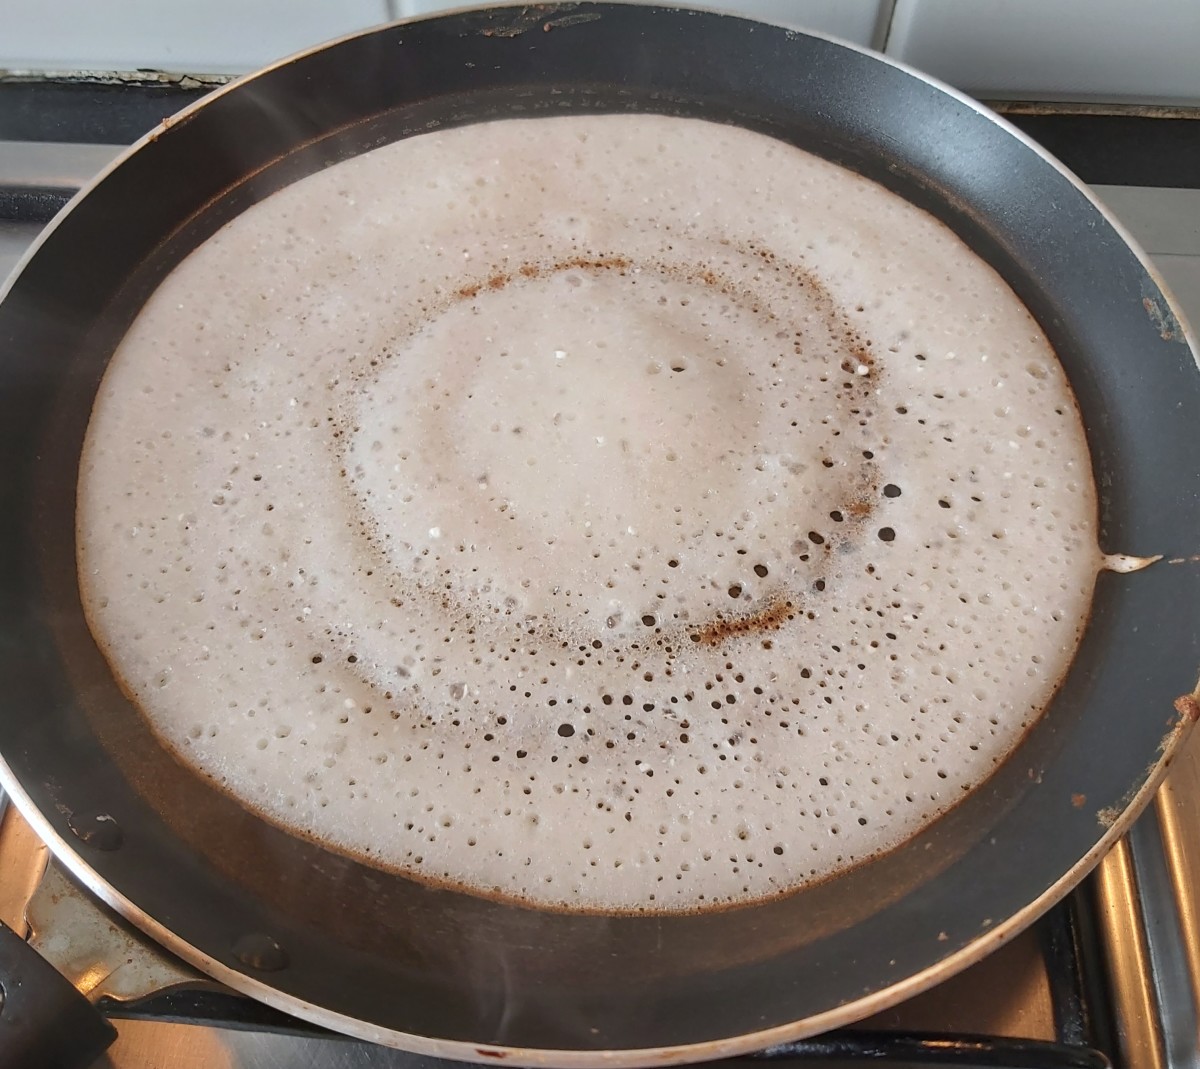 Cook till dosa cooked completely (you can see the base turned brown). You can roast it too. No need to cook on other side. Lot of holes on dosa indicates batter fermented well (well fermented batter gives porous and soft dosa).